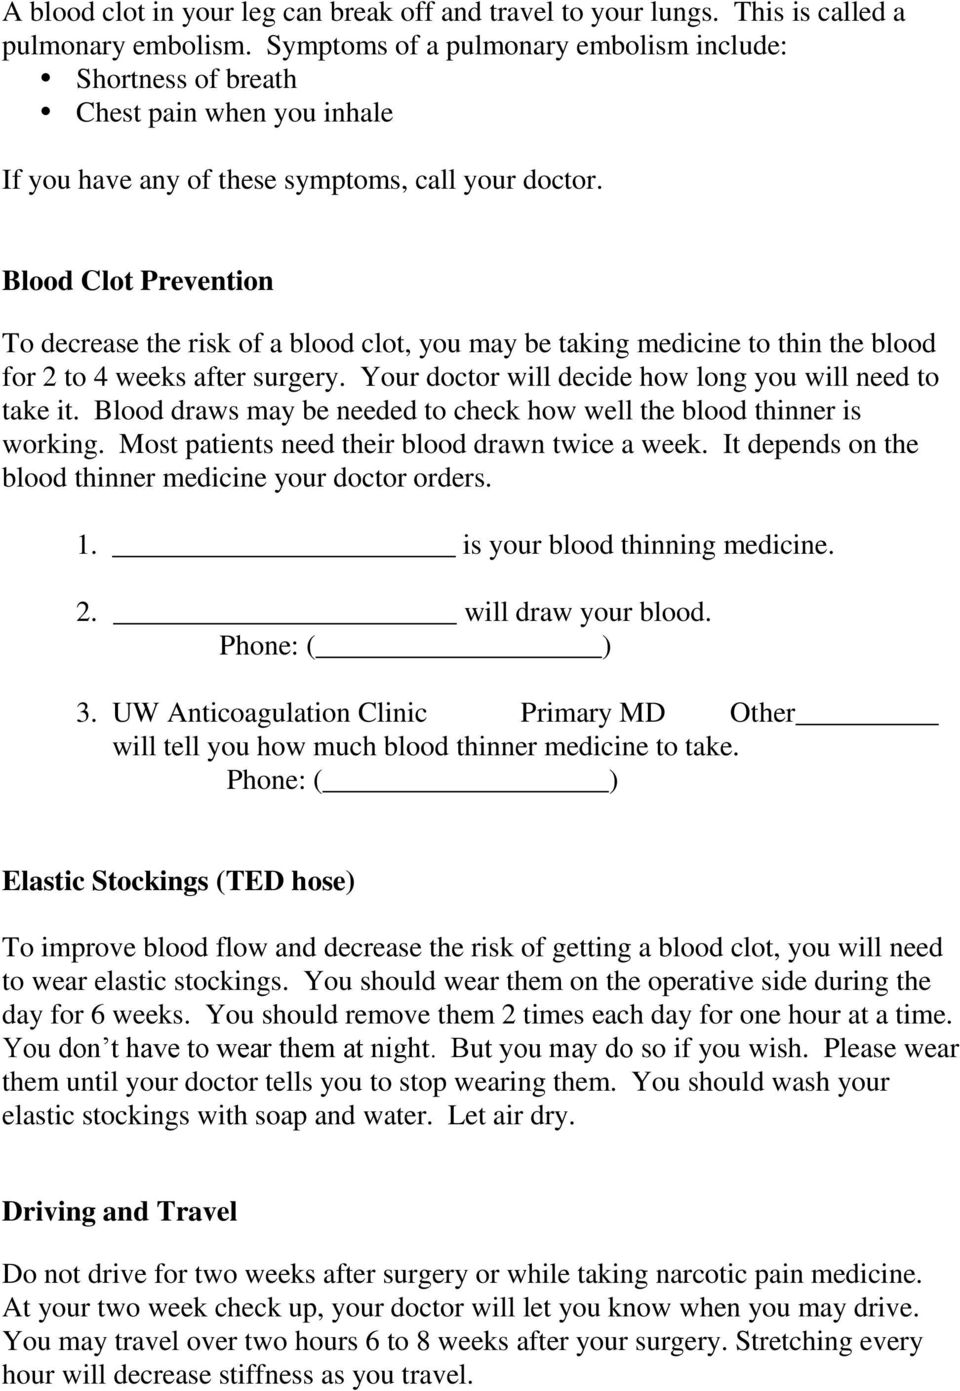 Blood Clot Prevention To decrease the risk of a blood clot, you may be taking medicine to thin the blood for 2 to 4 weeks after surgery. Your doctor will decide how long you will need to take it.